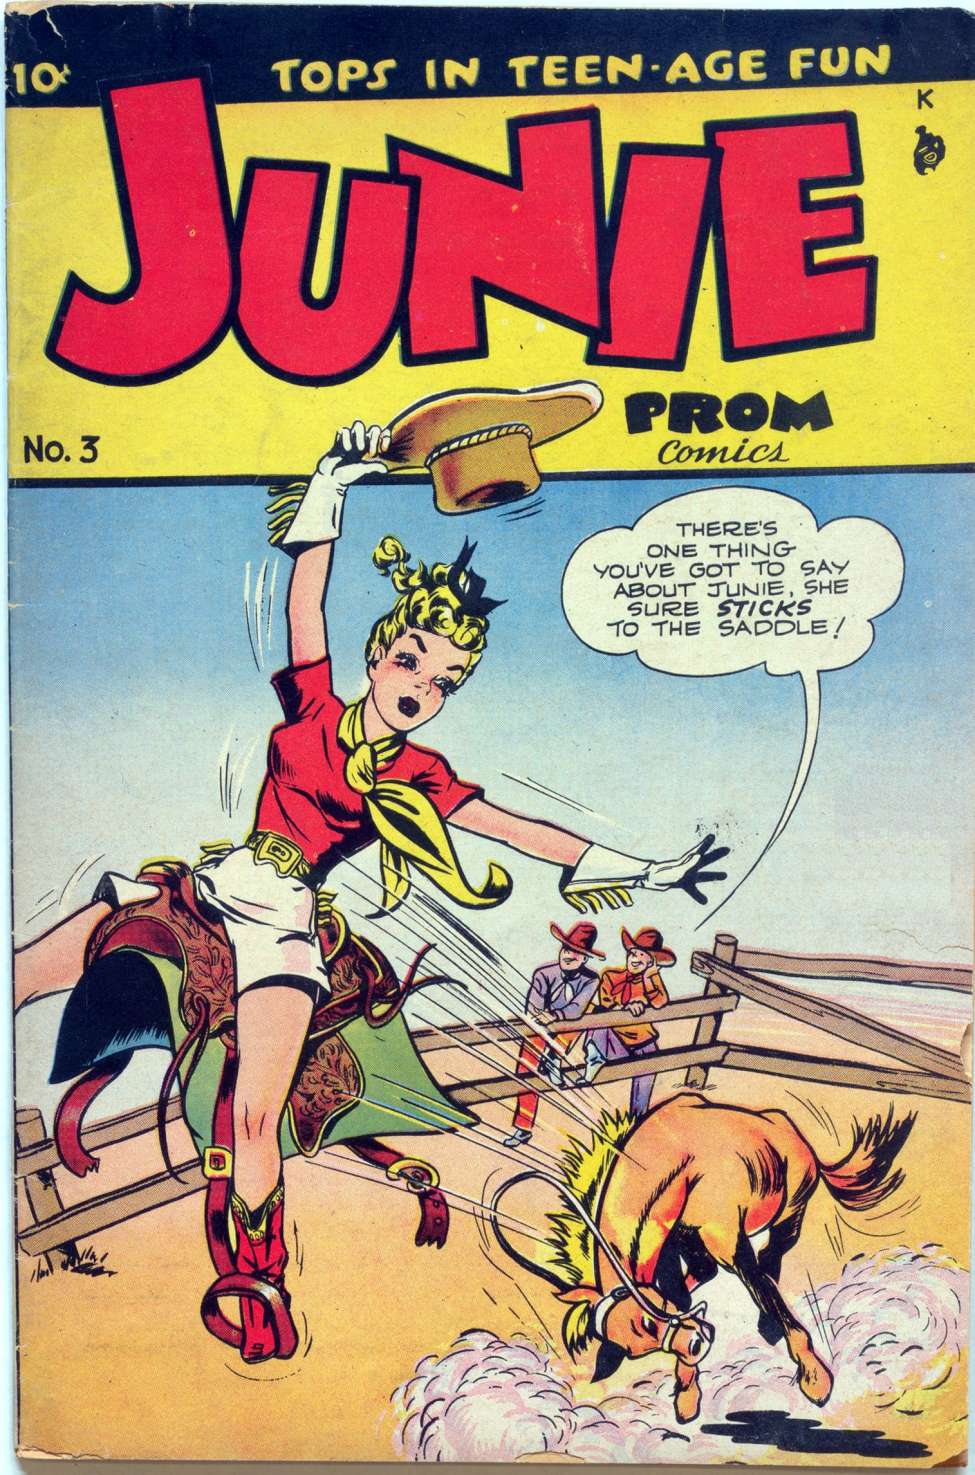 Book Cover For Junie Prom Comics 3